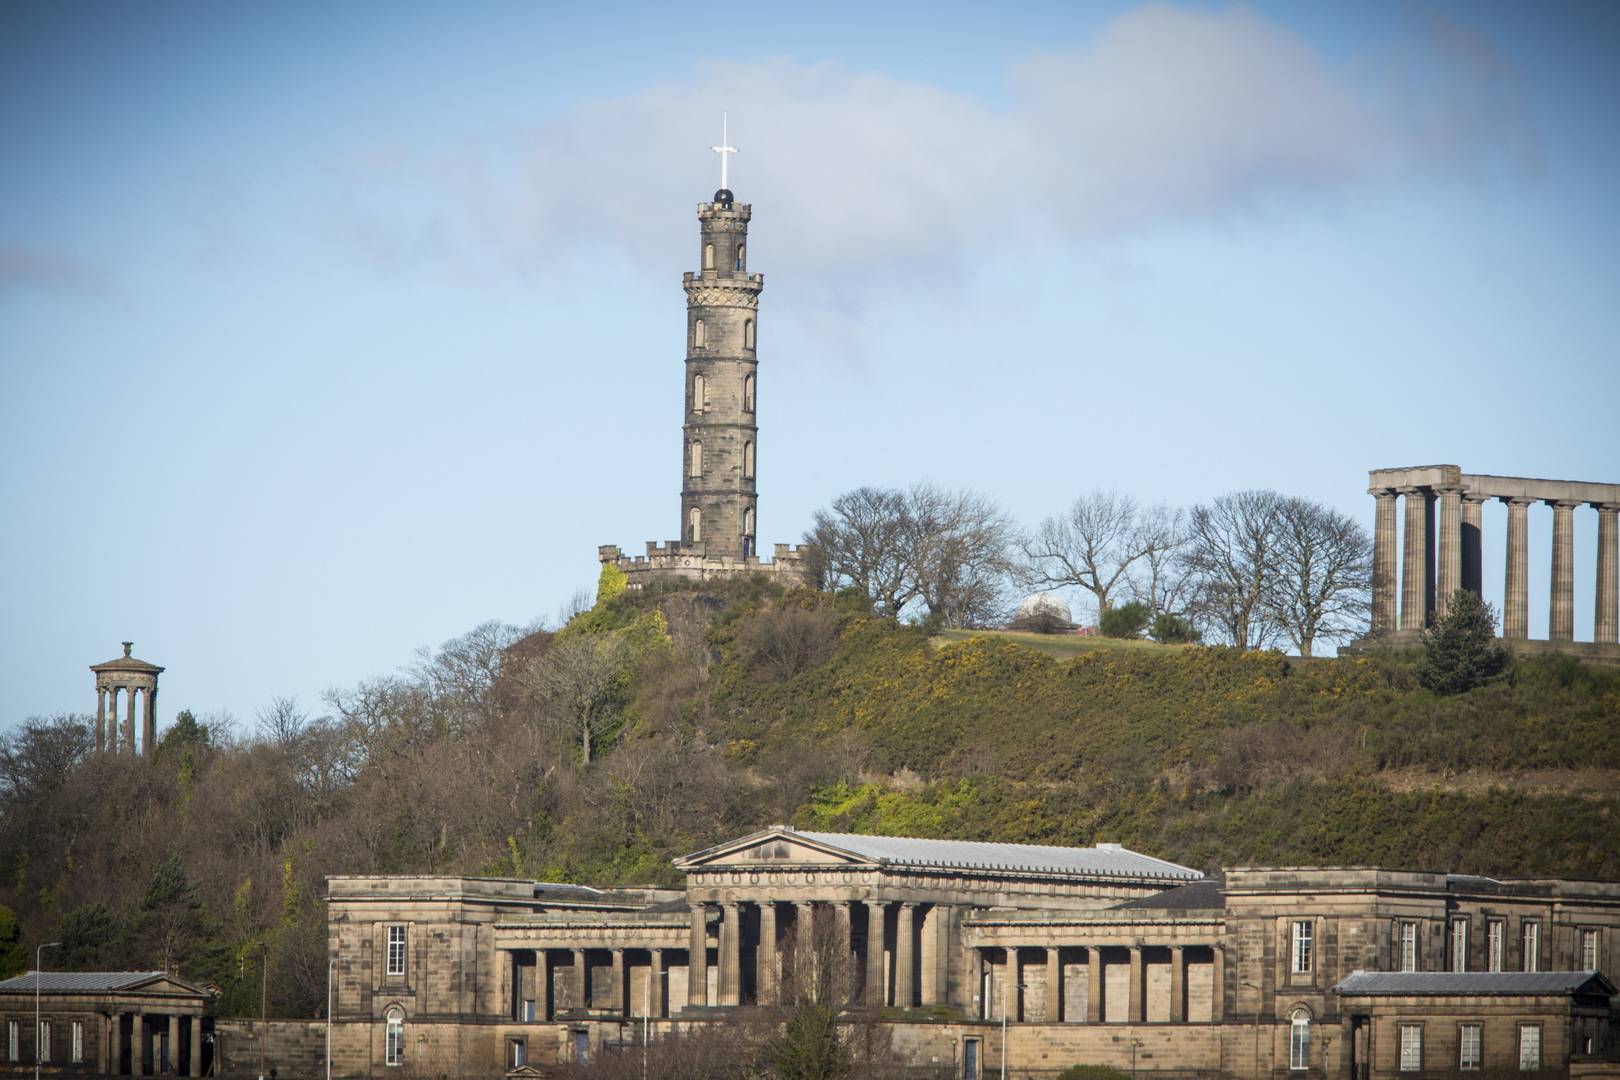 Picture of Nelson Monument on Calton Hill with a blue sky in the background.